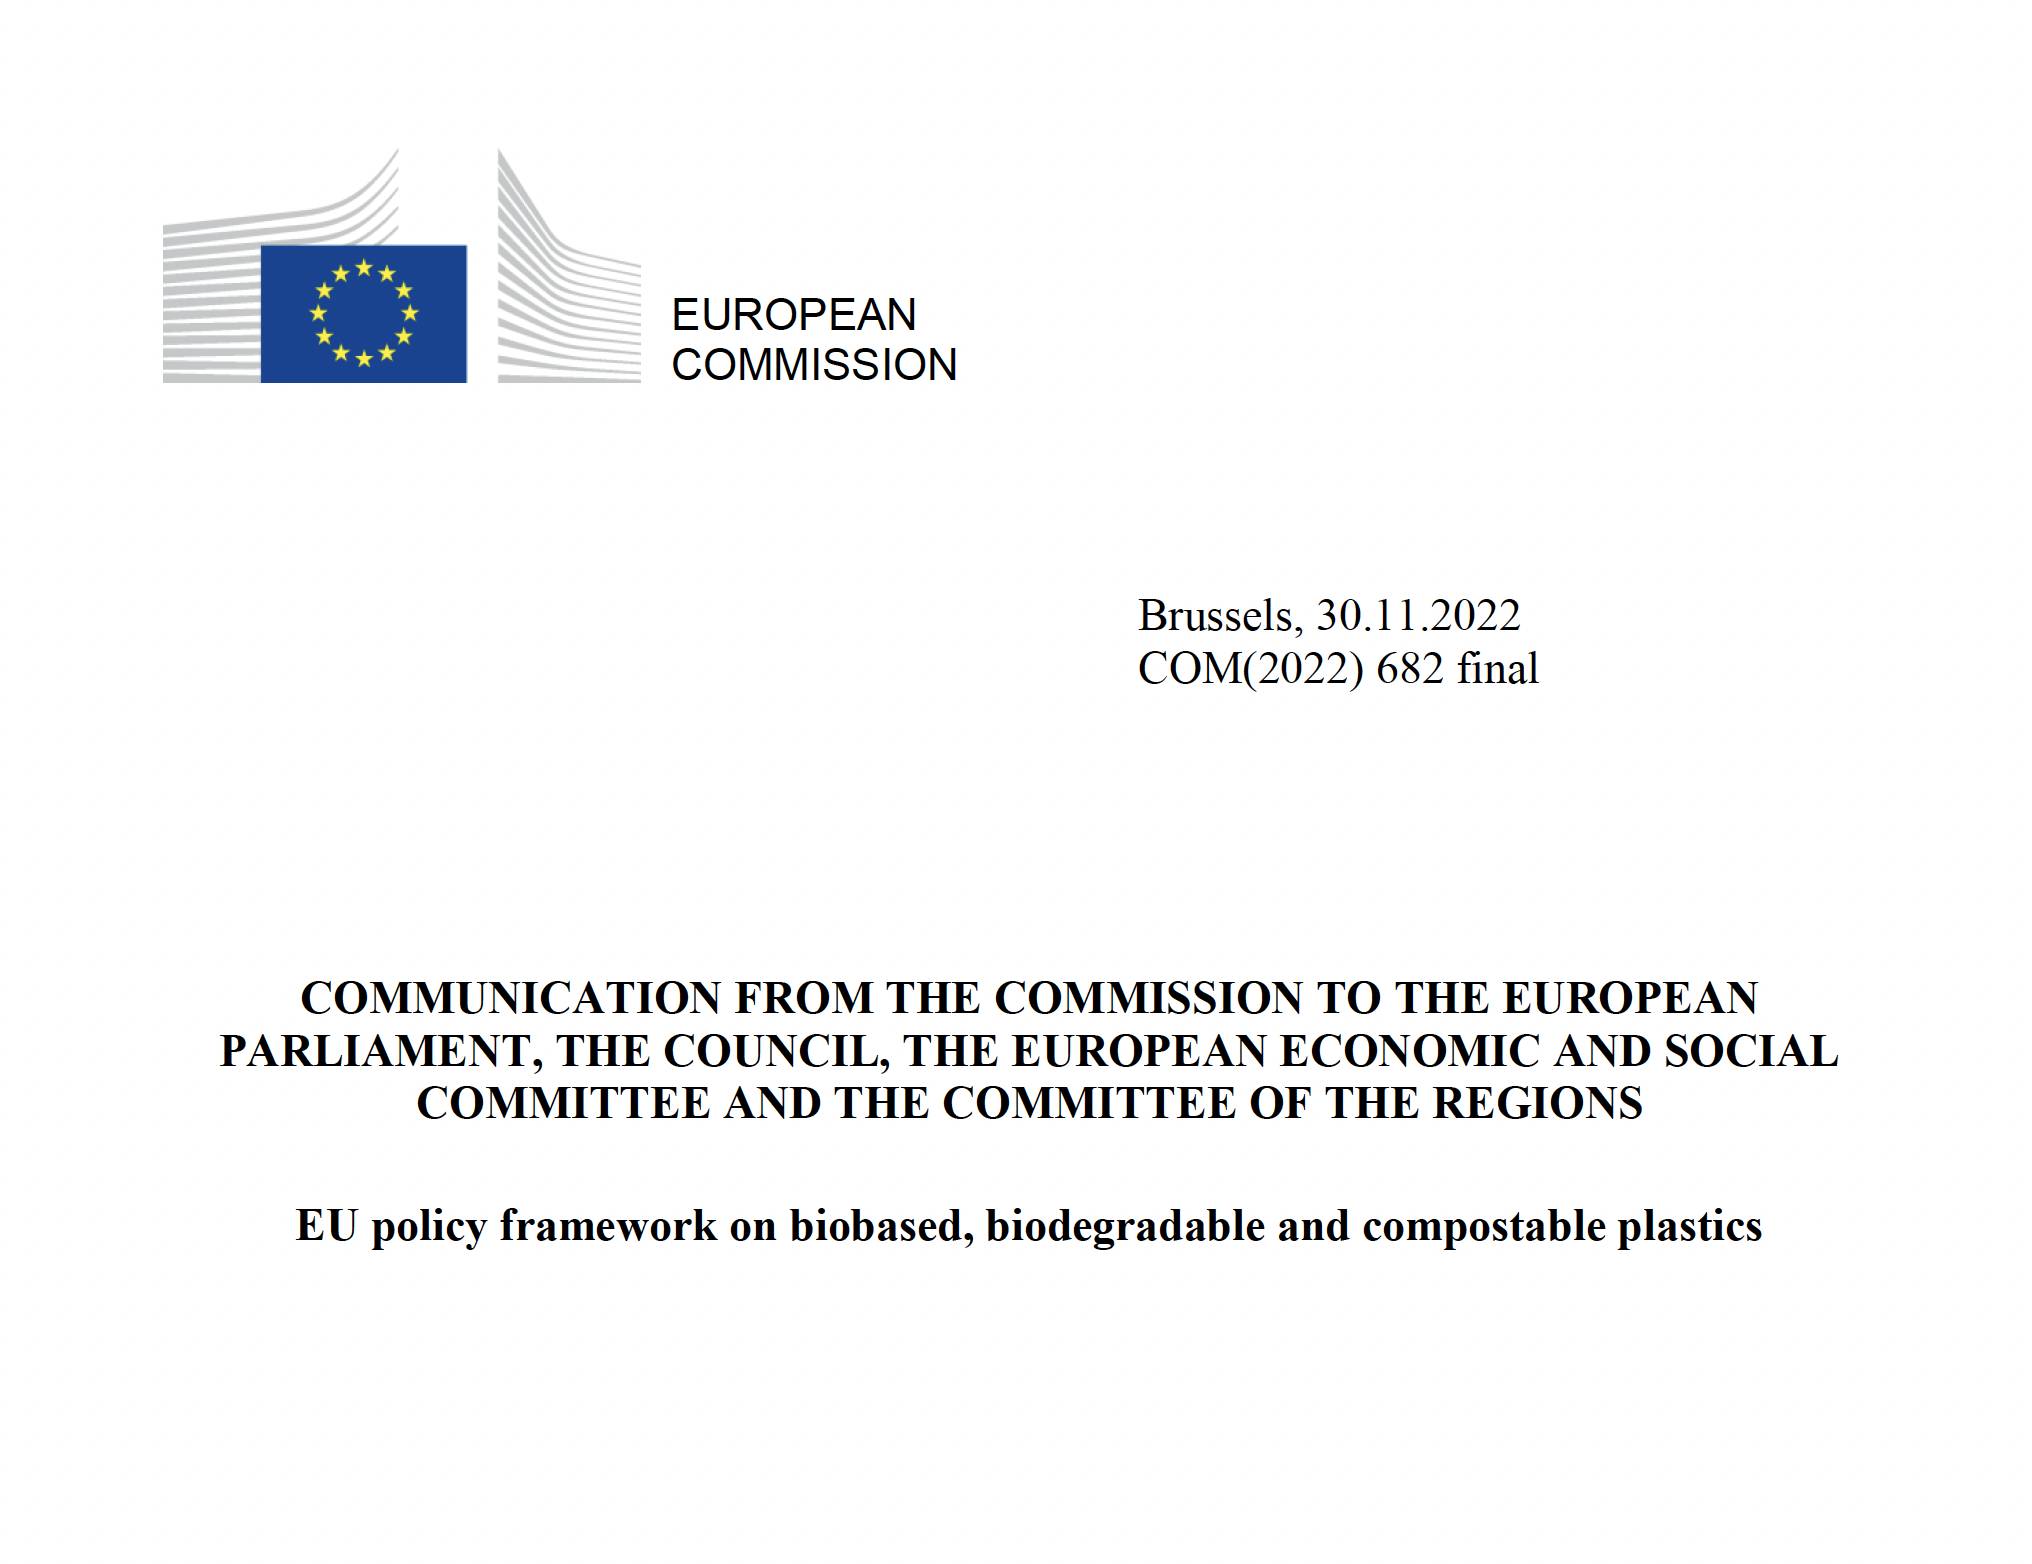 Policy framework on biobased, biodegradable and compostable plastics